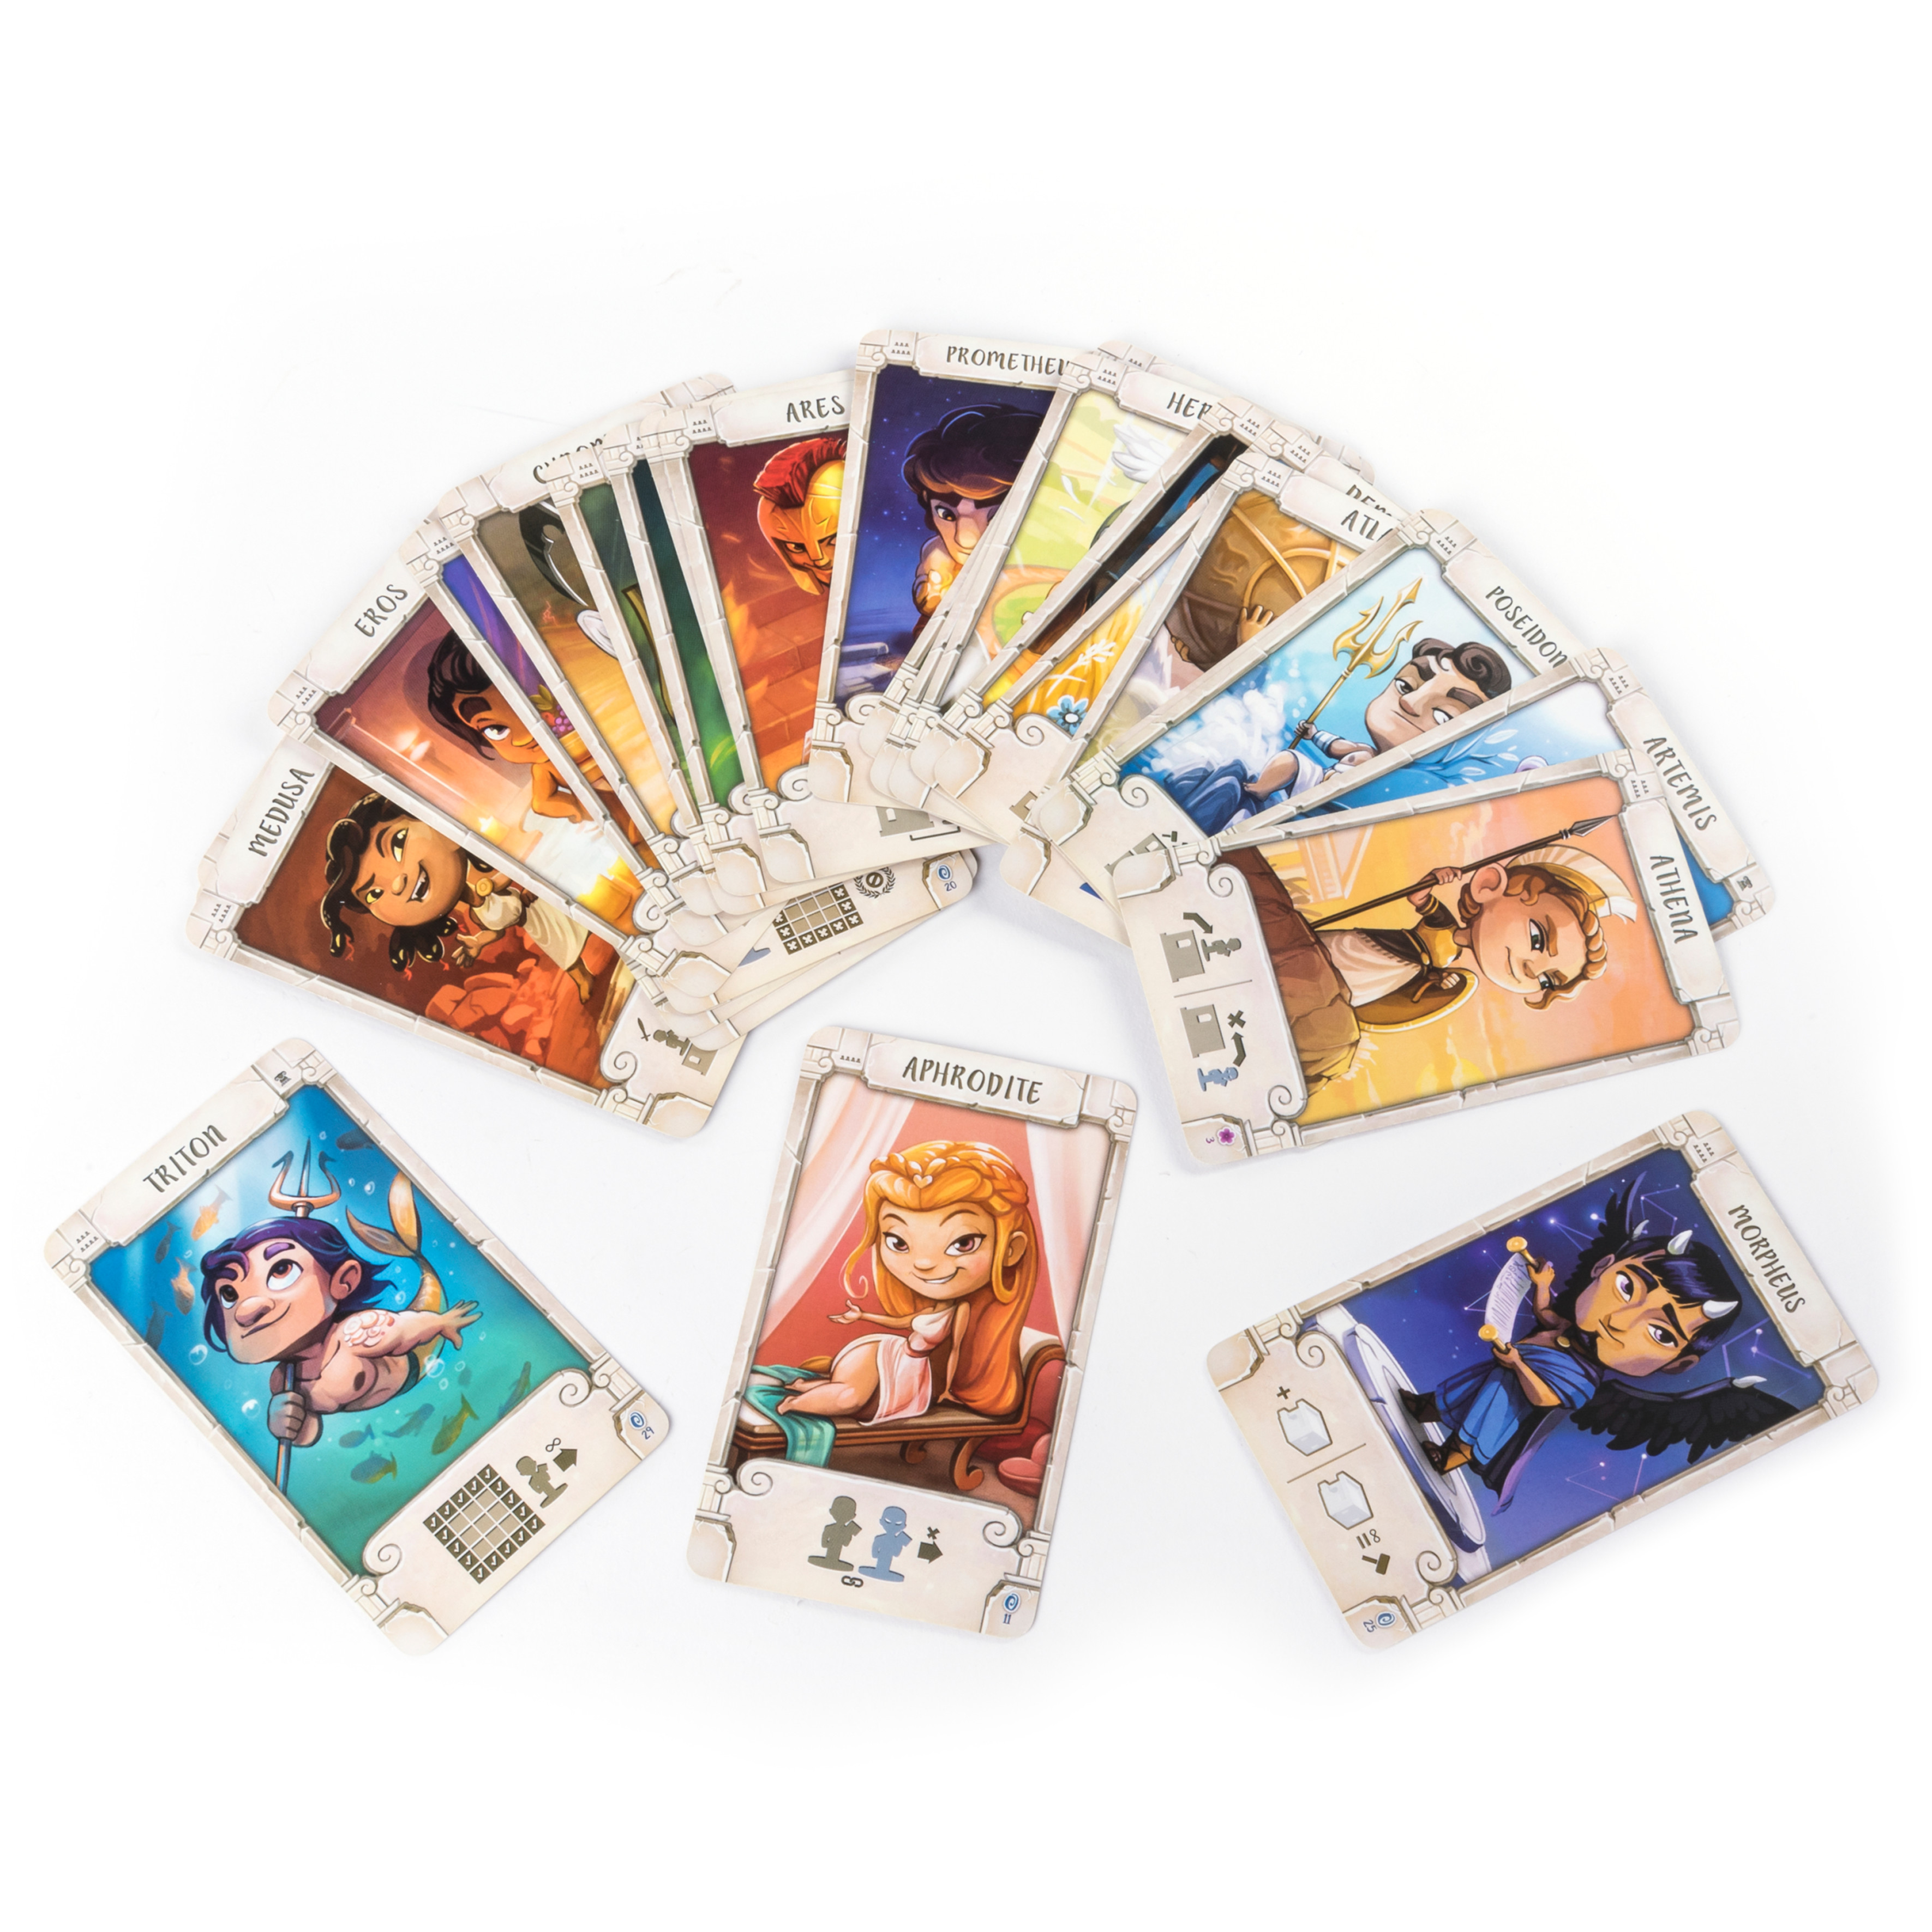 Santorini, Strategy Family Board Game 2-4 Players Classic Fun Building Greek Mythology Card Game, for Kids & Adults Ages 8 and up - image 3 of 6